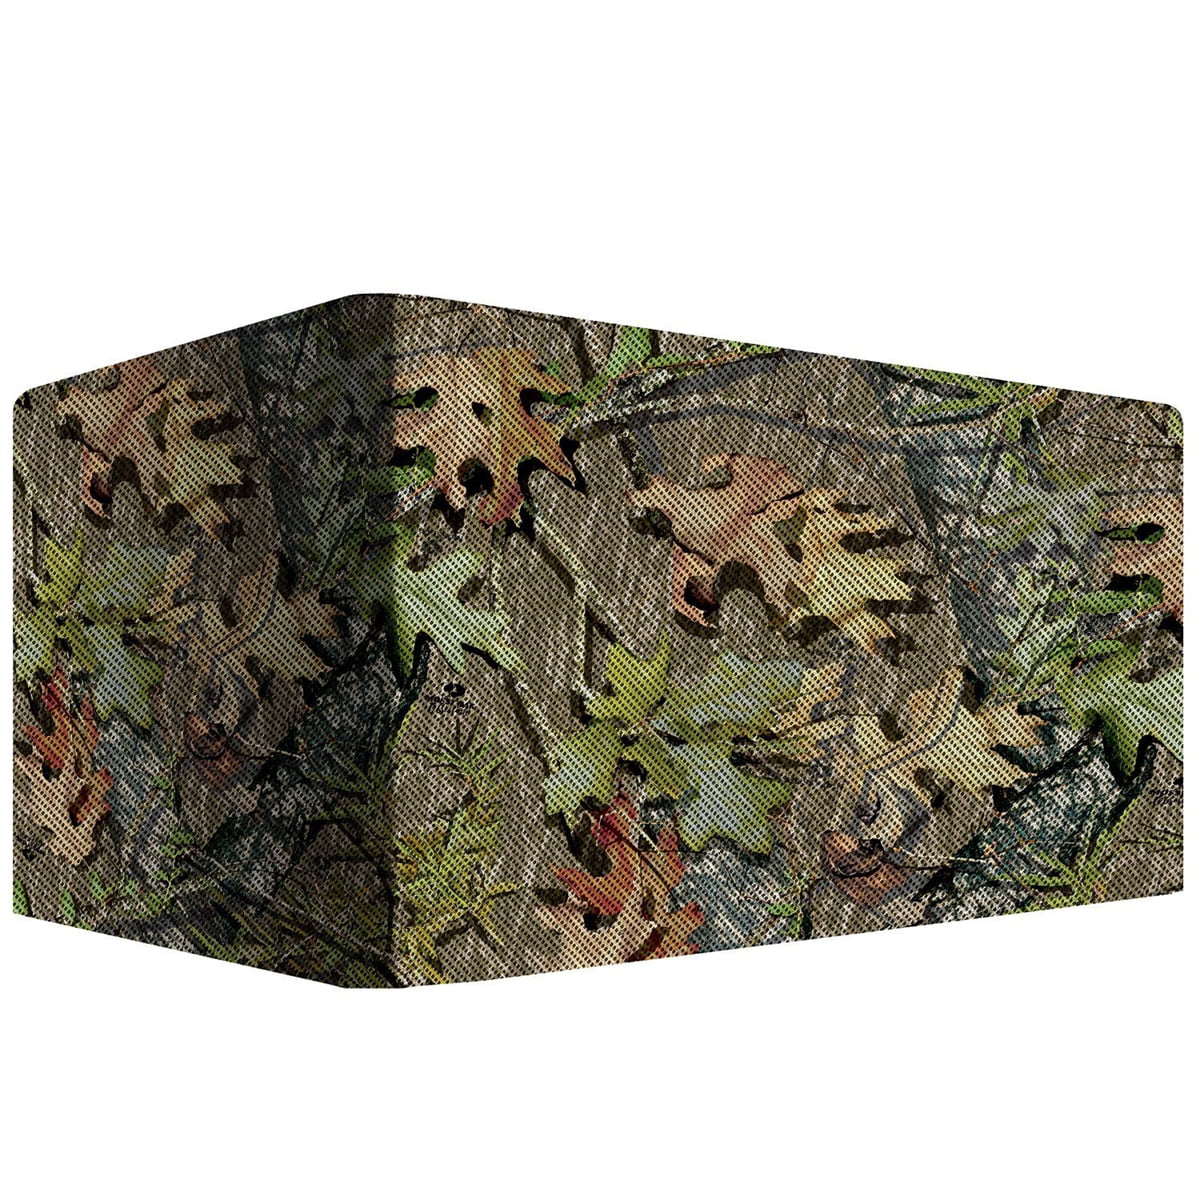 Mossy Oak Mo-12cn-bc Netting Break up Country for sale online 